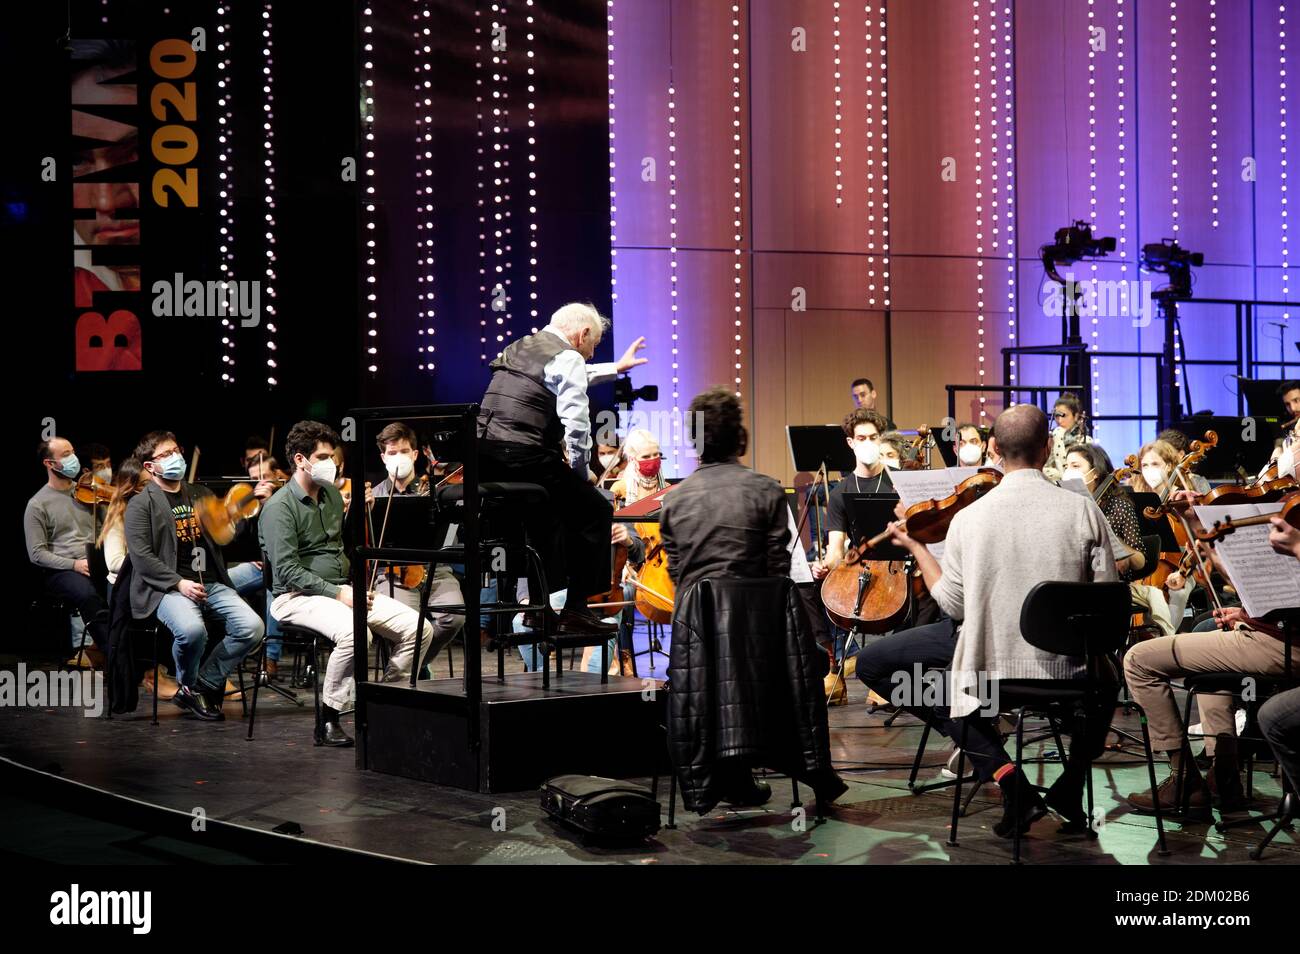 Bonn, Germany. 16th Dec, 2020. Conductor Daniel Barenboim rehearses with  the West-Eastern Divan Orchestra for the celebratory concert marking the  250th anniversary of Ludwig van Beethoven's baptism. The concert will take  place